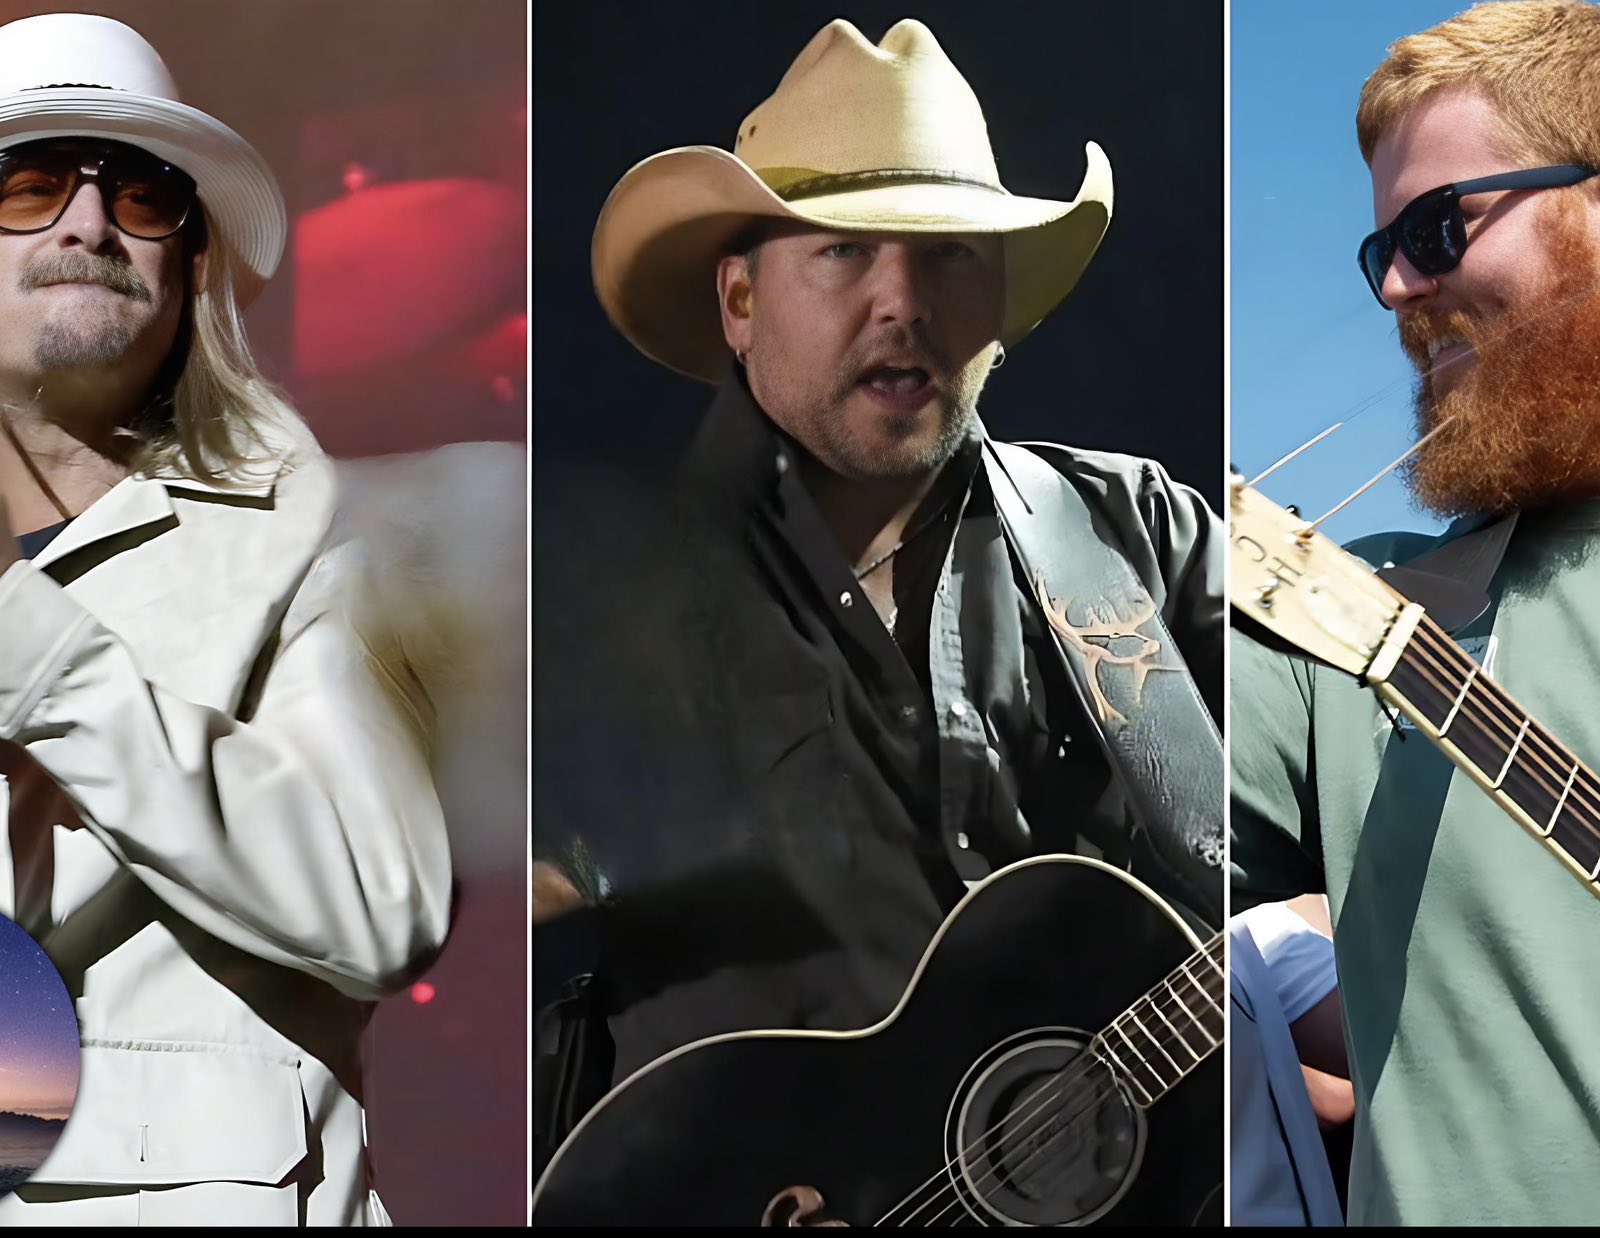 Oliver Anthony will join Jason Aldean and Kid Rock for Toby Keith’s tribute during the Super Bowl halftime show.